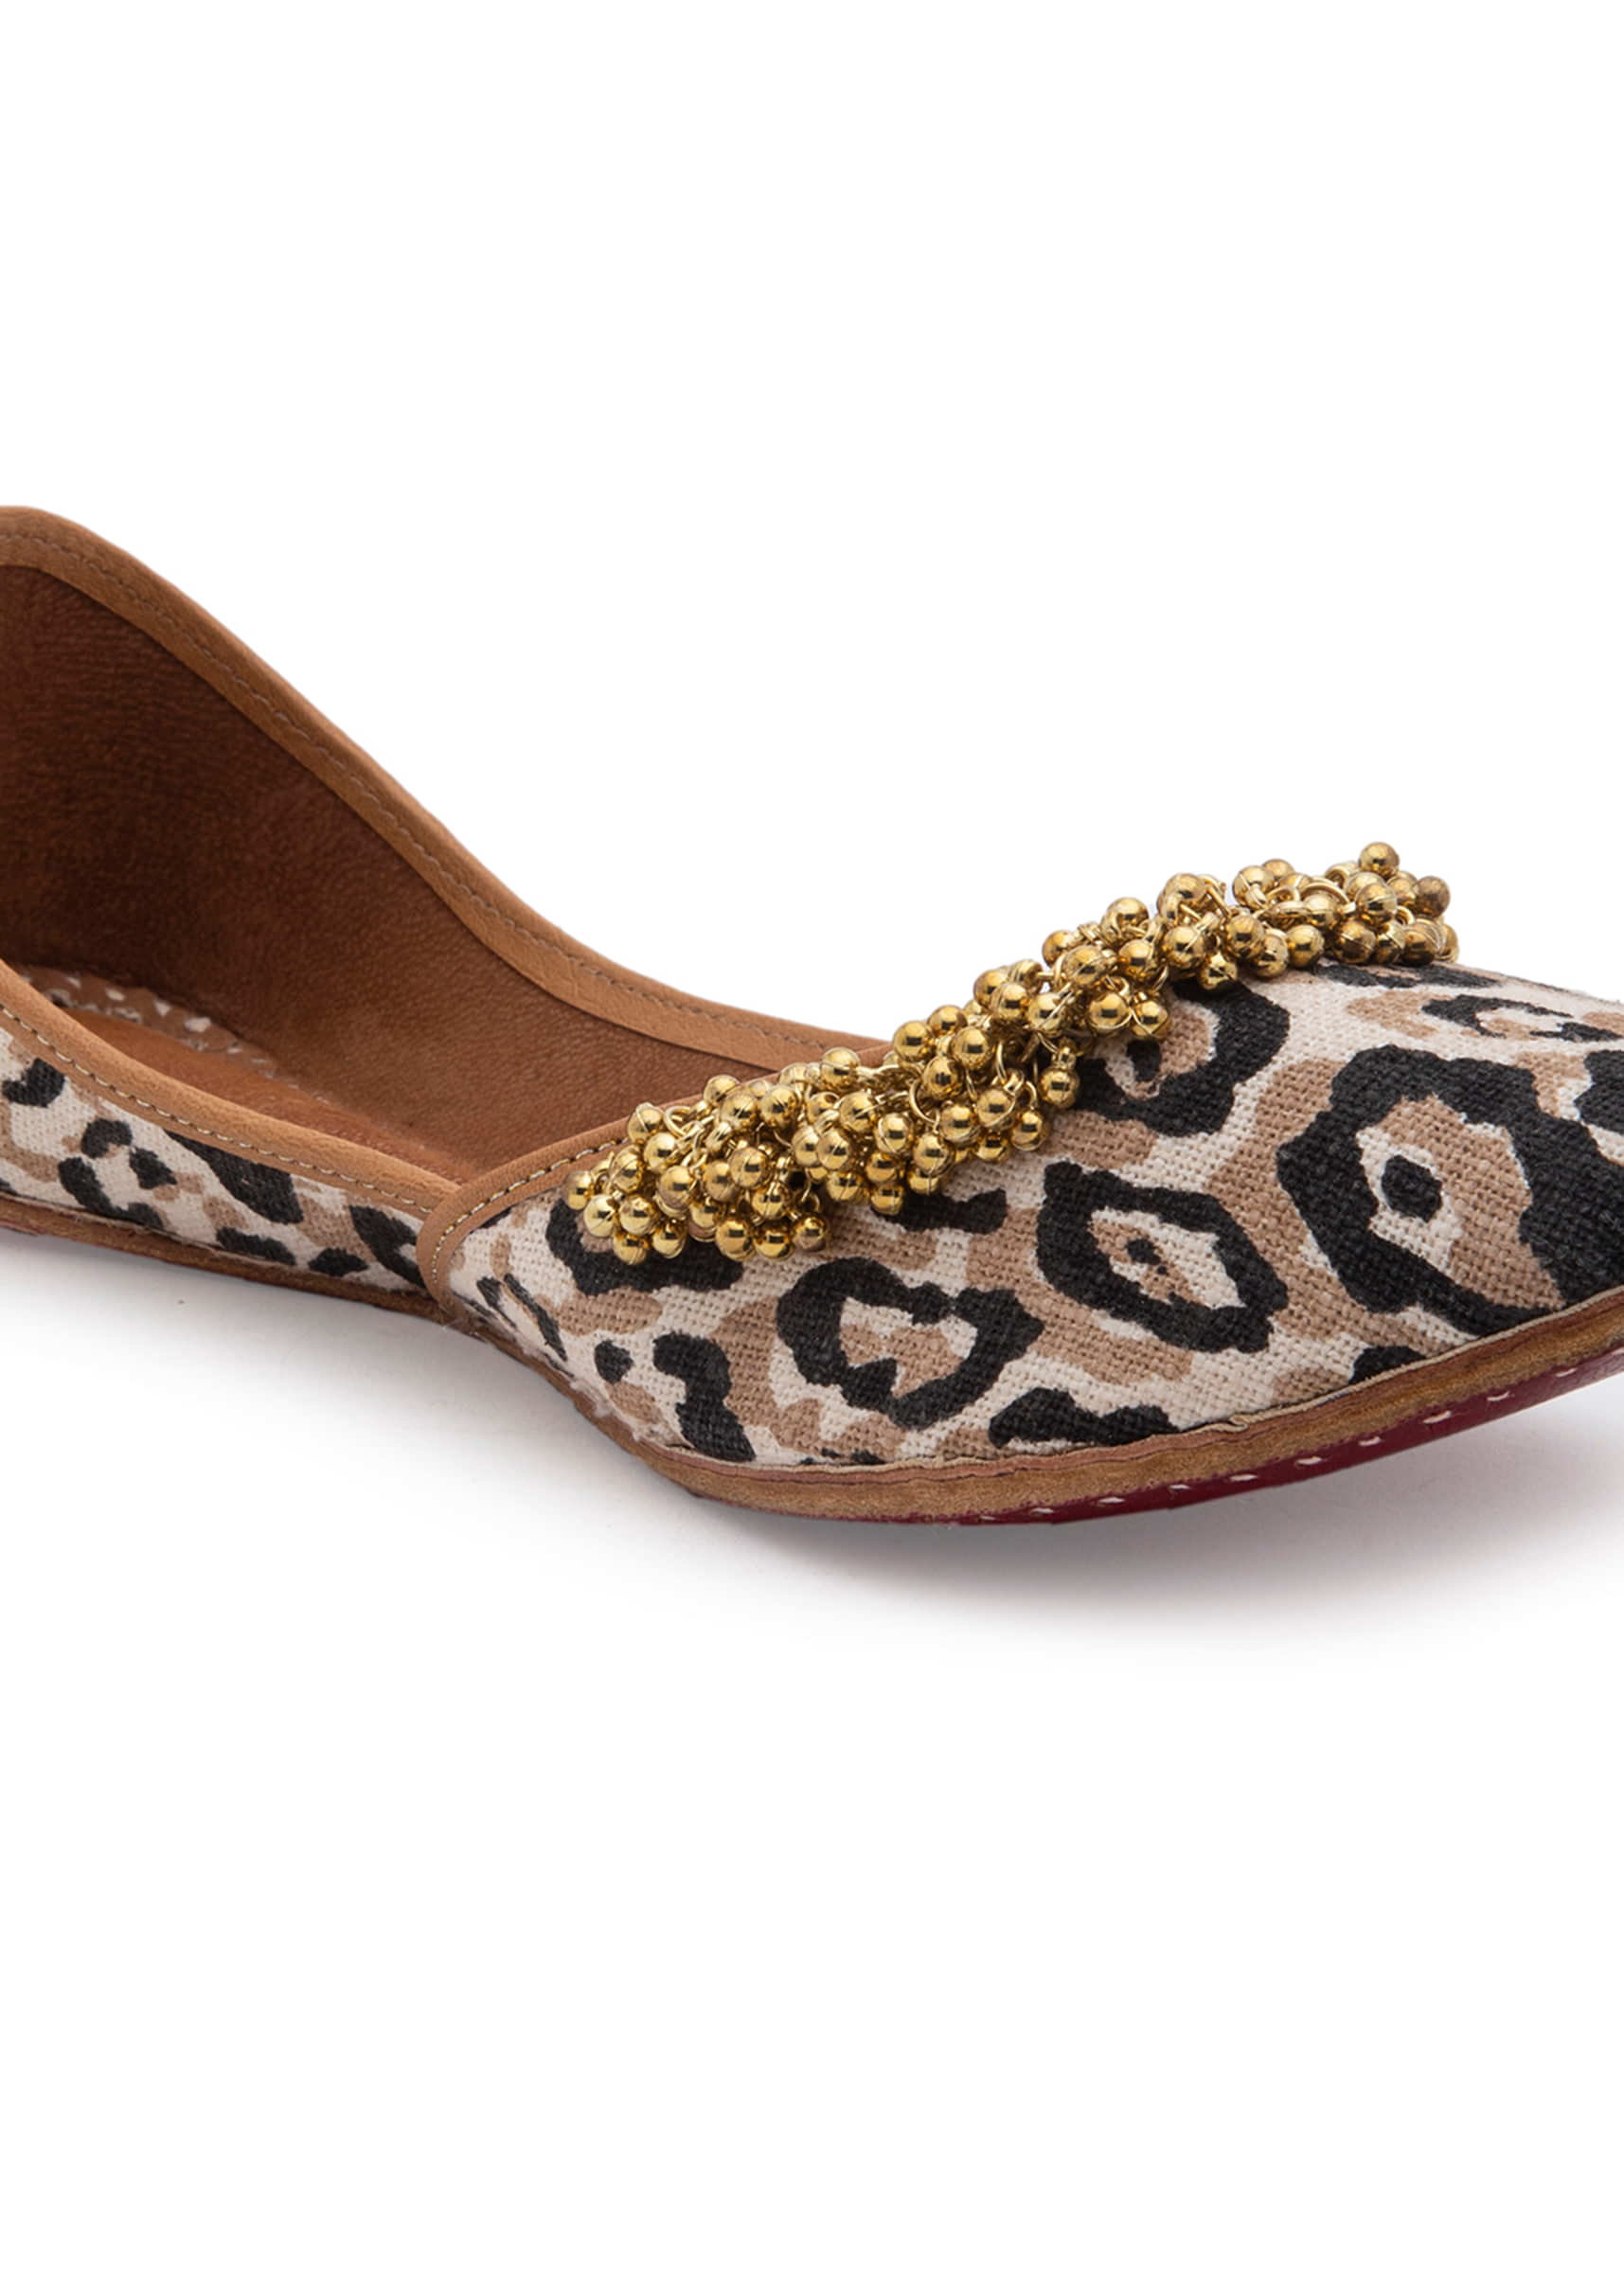 Multi Colored Juttis In Jacquard With Animal Print Design And Tiny Ghungroos By 5 Elements